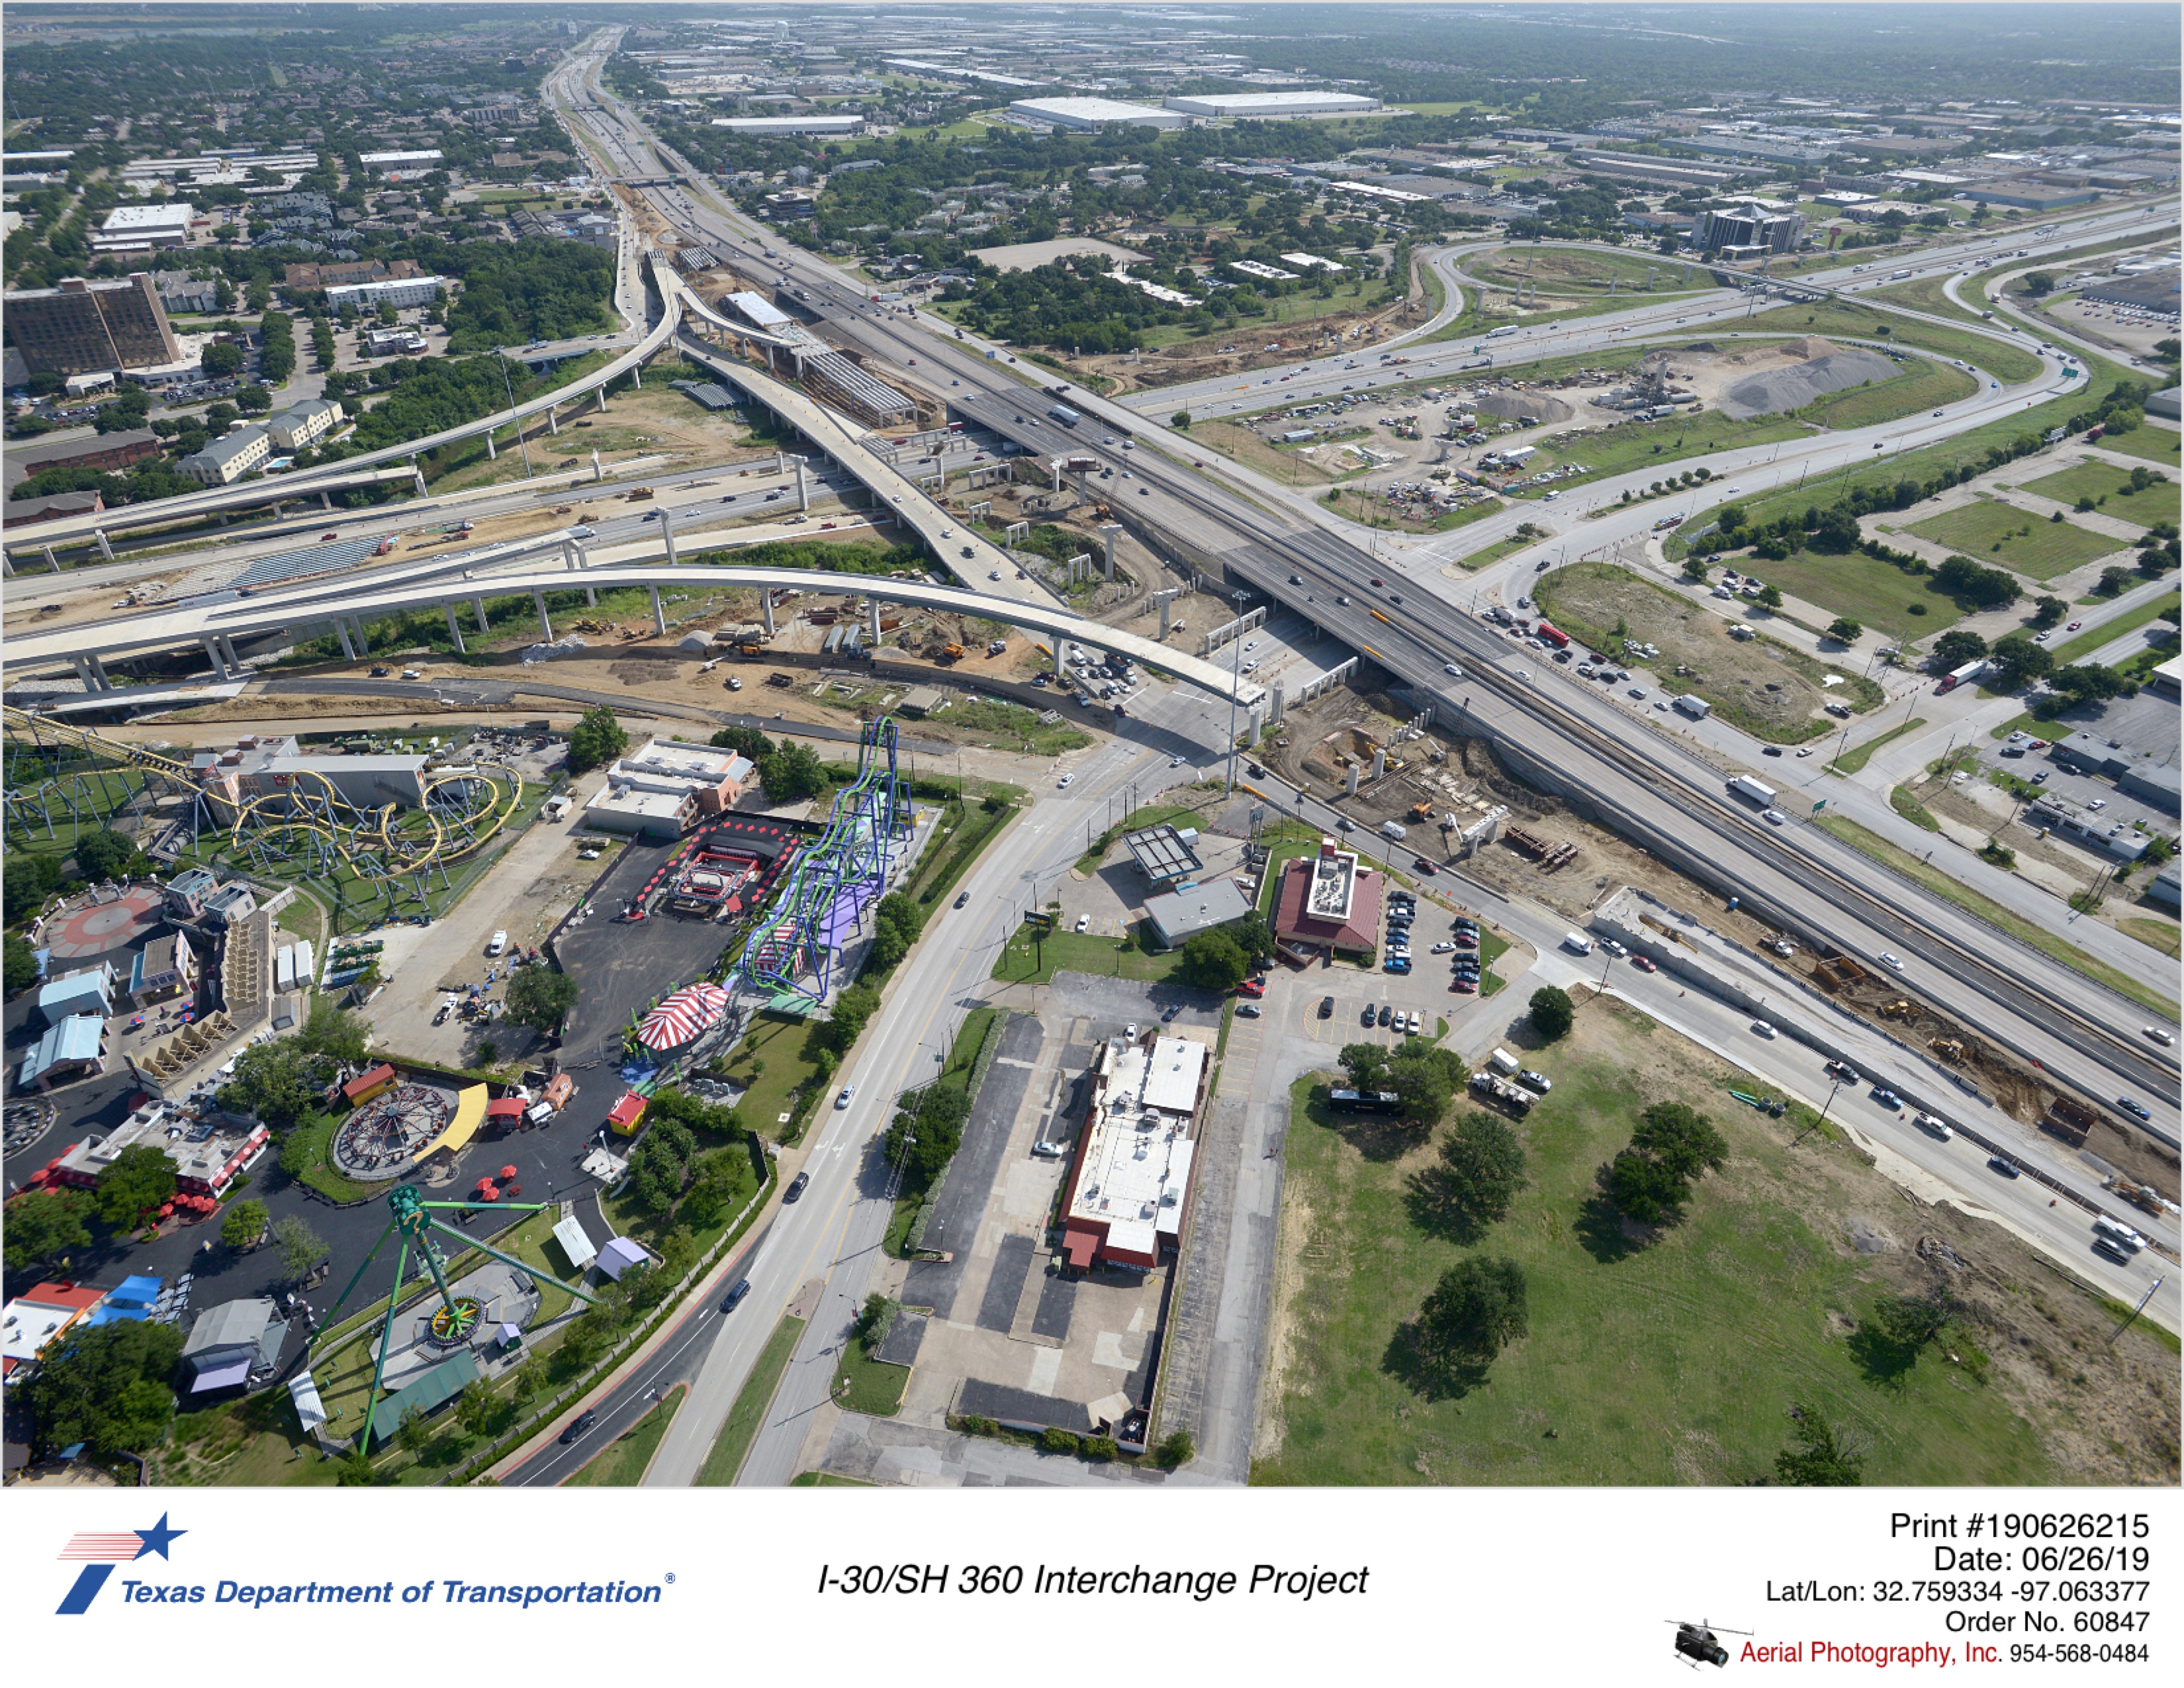 I-30/SH 360 interchange looking northeast. Construction of east-to-south direct connector south of Six Flags Dr seen.